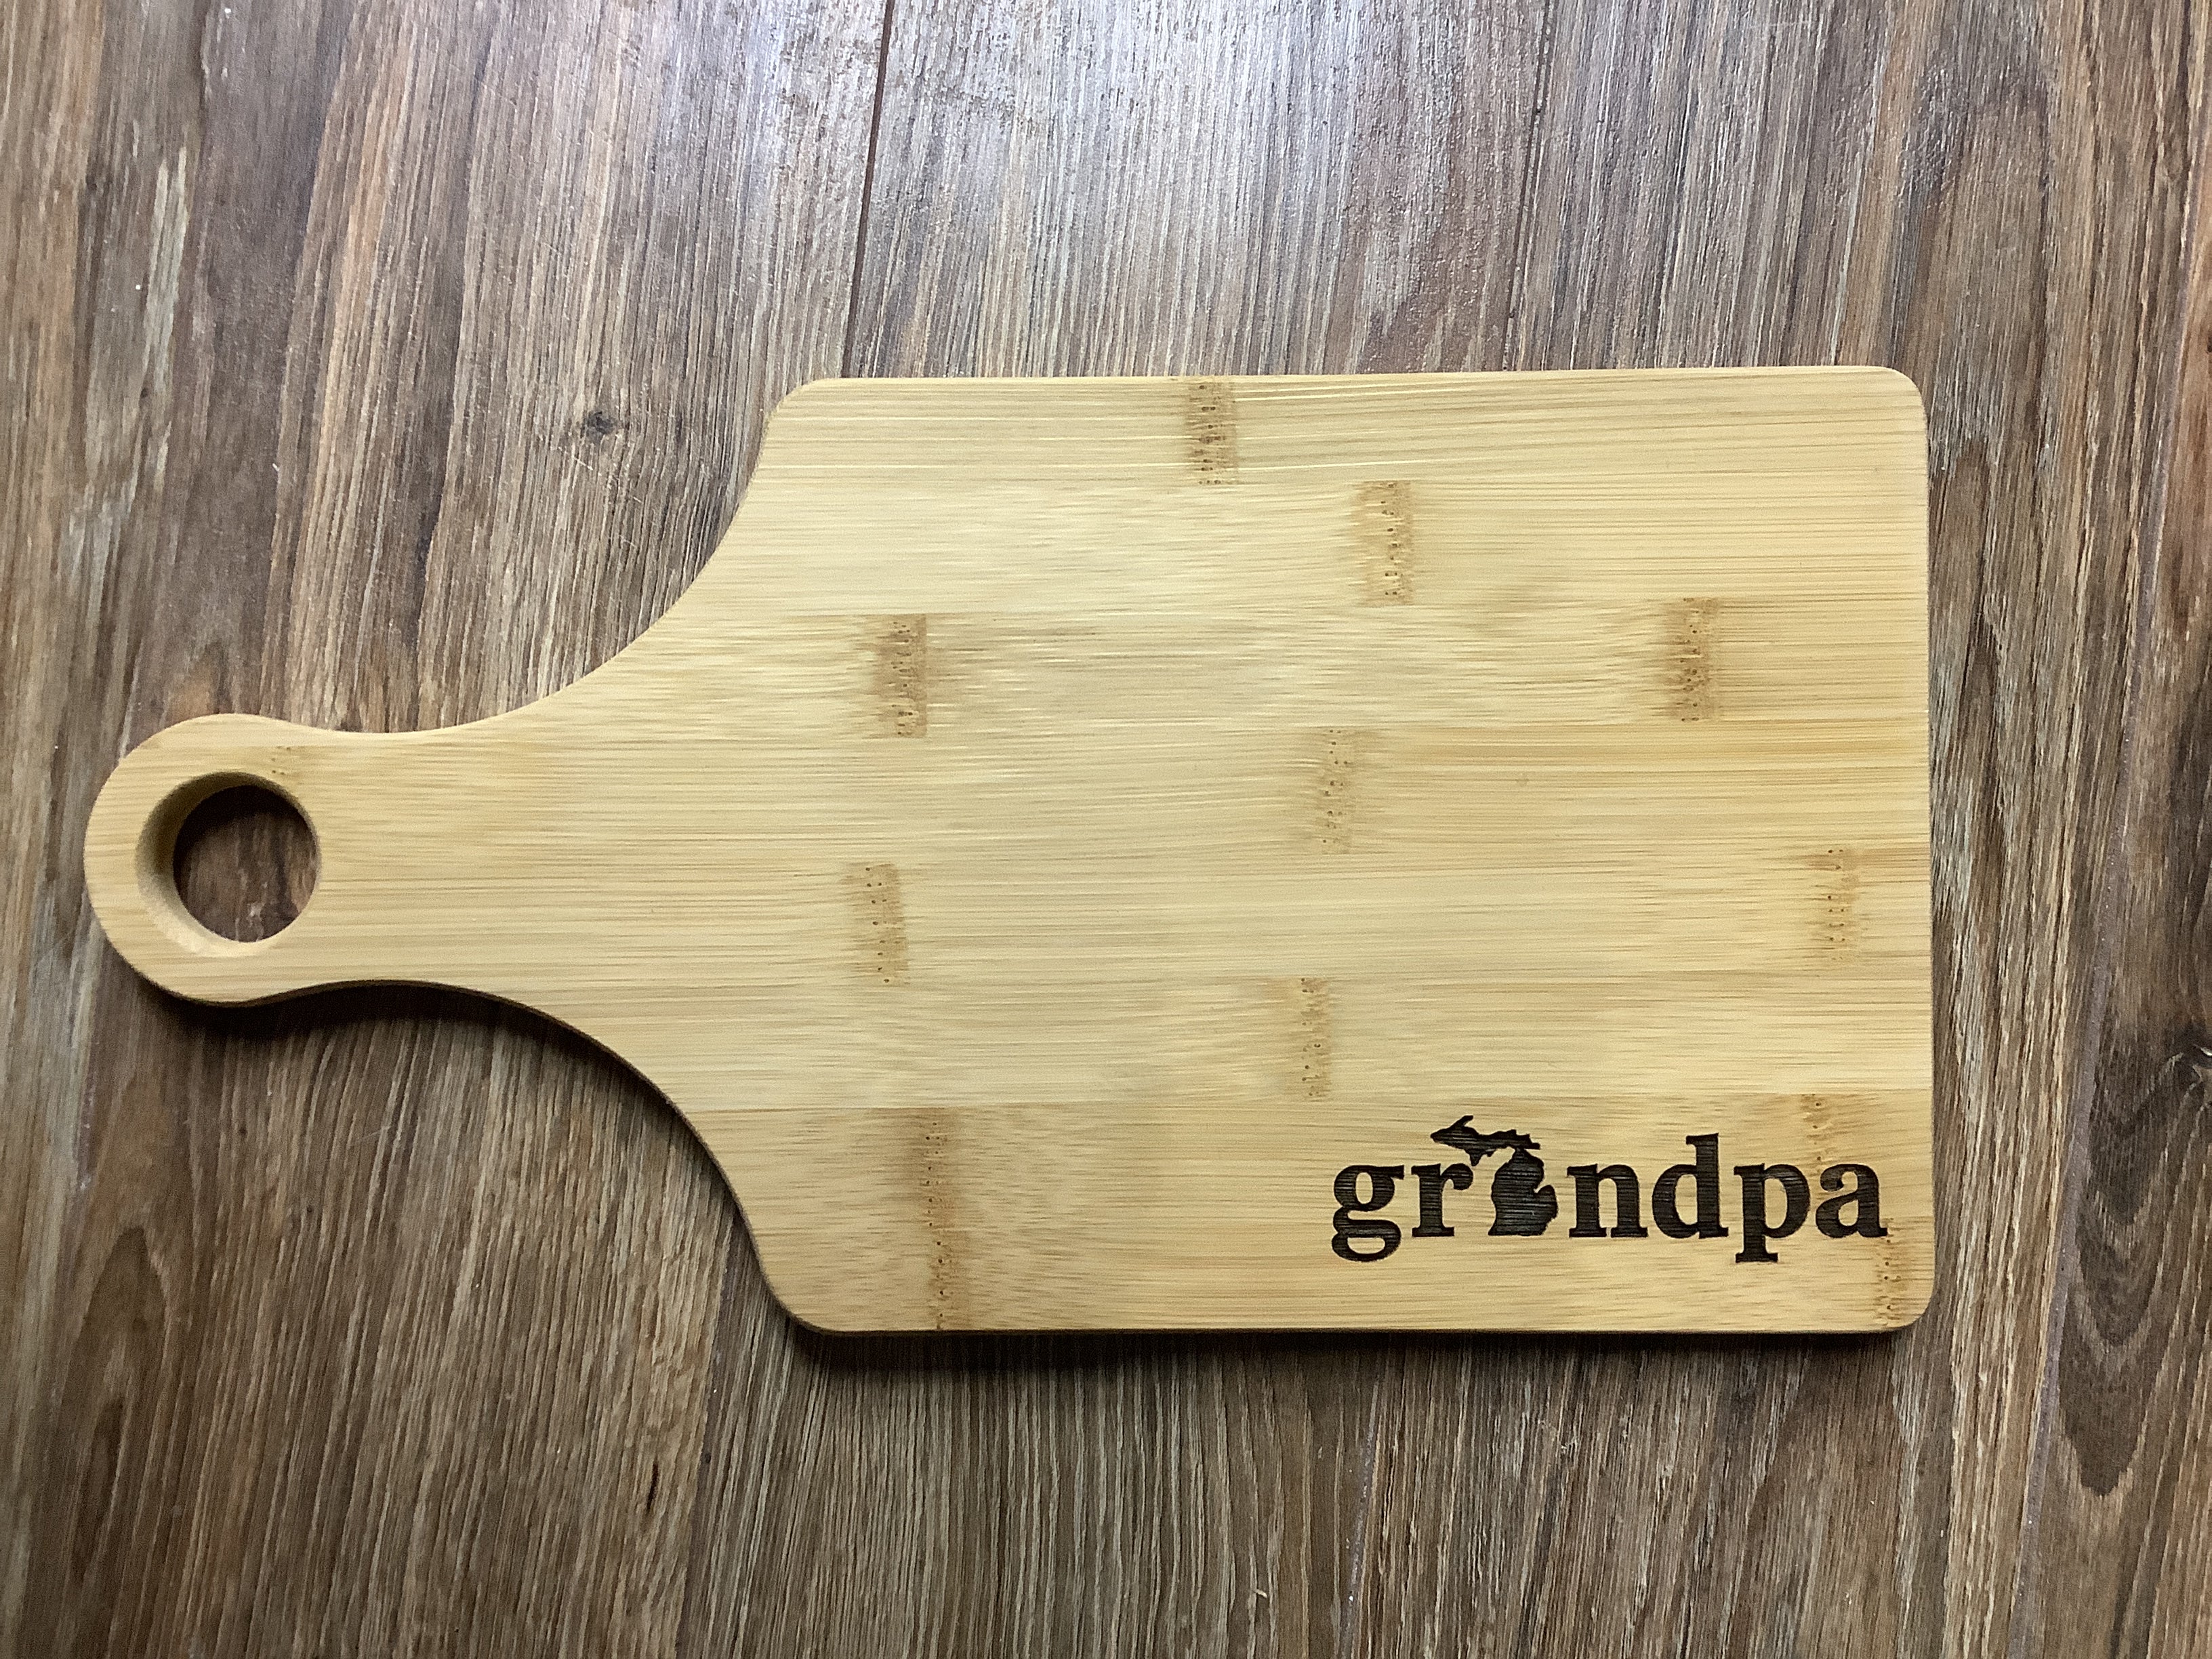 Grandpa - Word - Wooden Engraved - Cutting Board